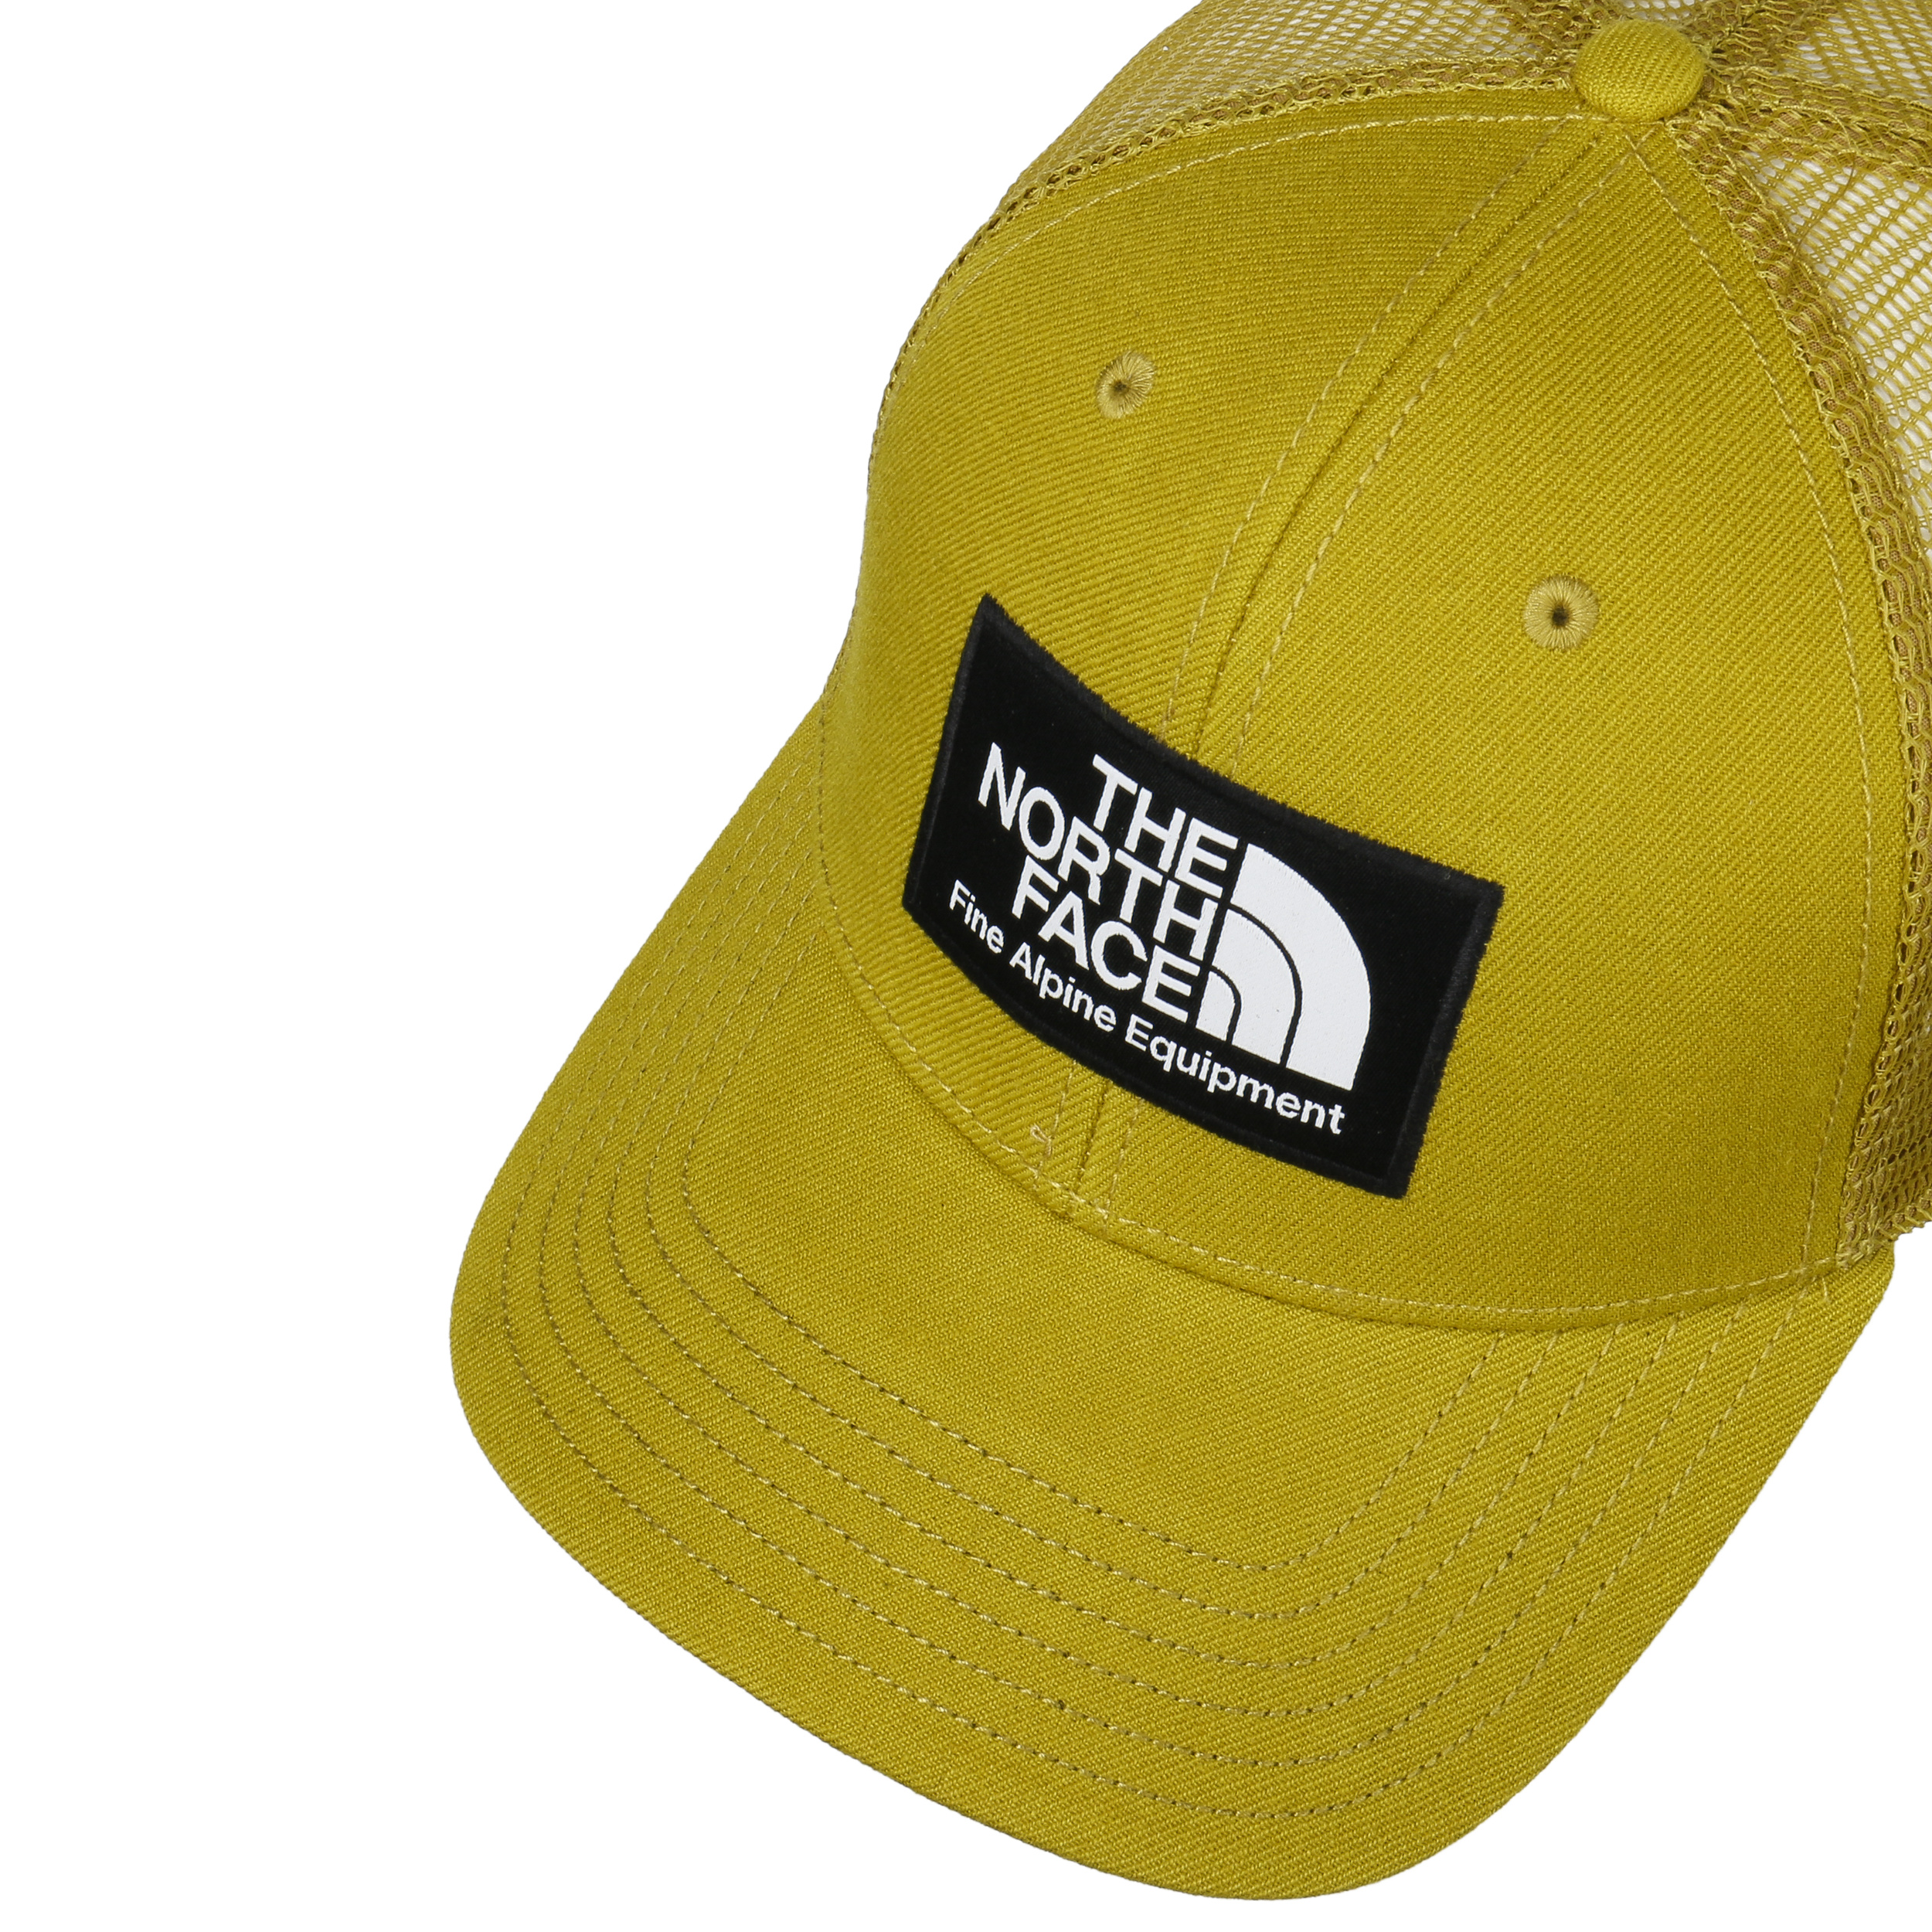 Mudder Deep Fit Trucker Cap by The North Face - 37,95